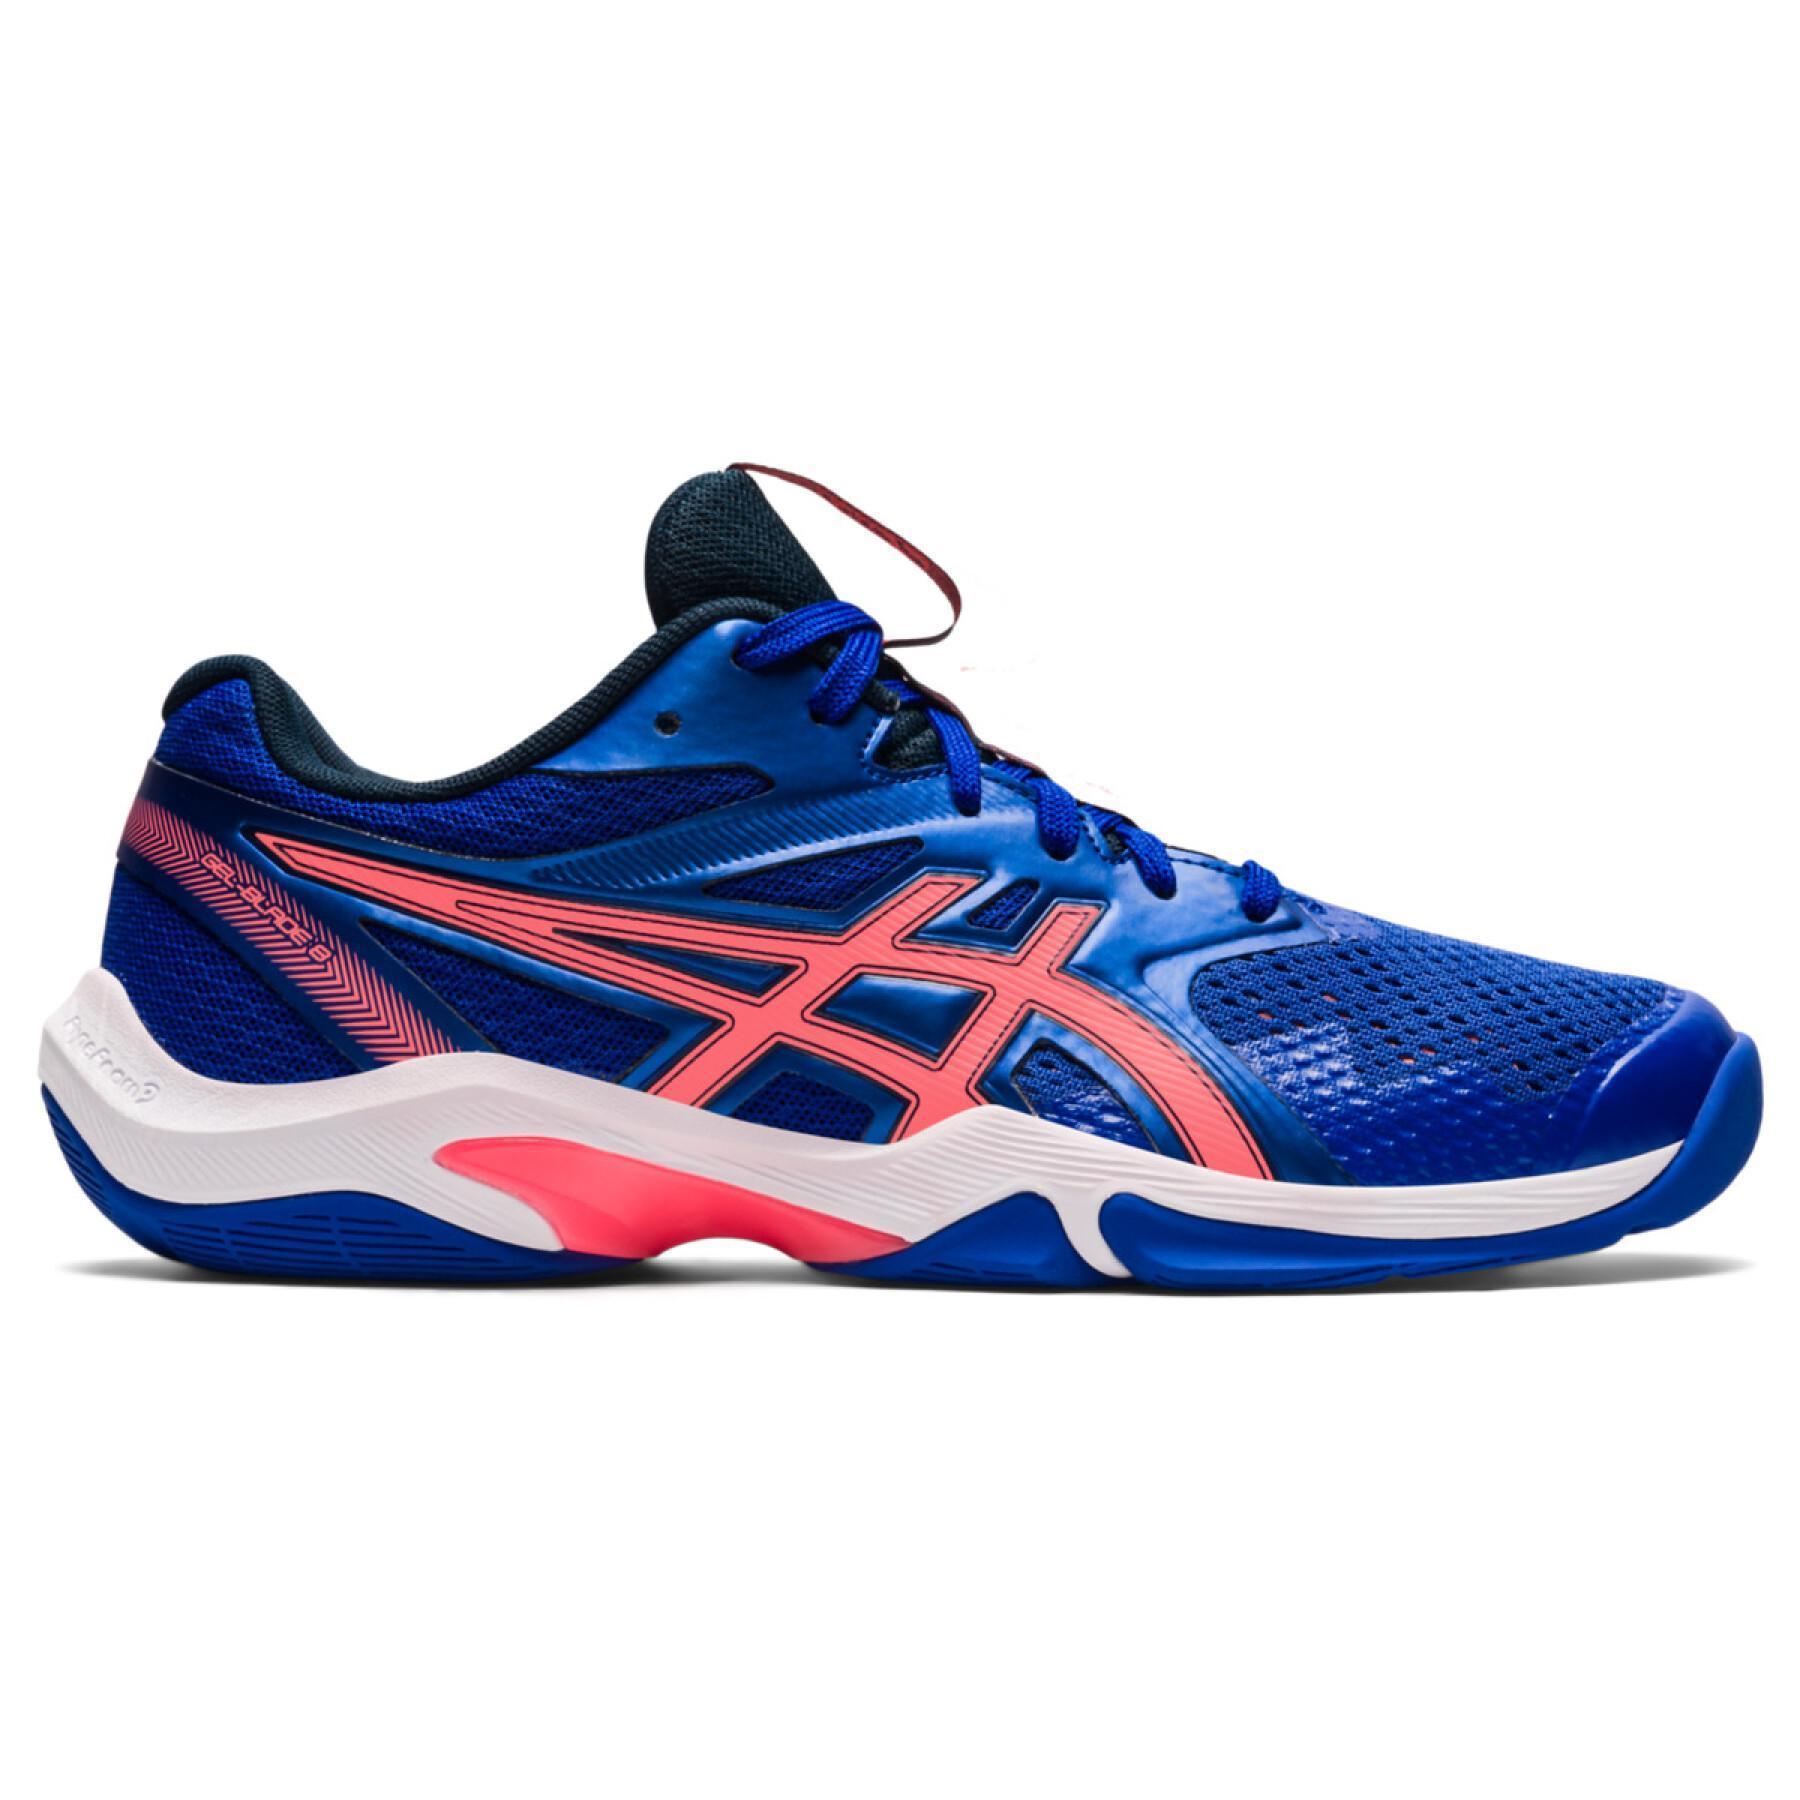 asics shoes volleyball 2017